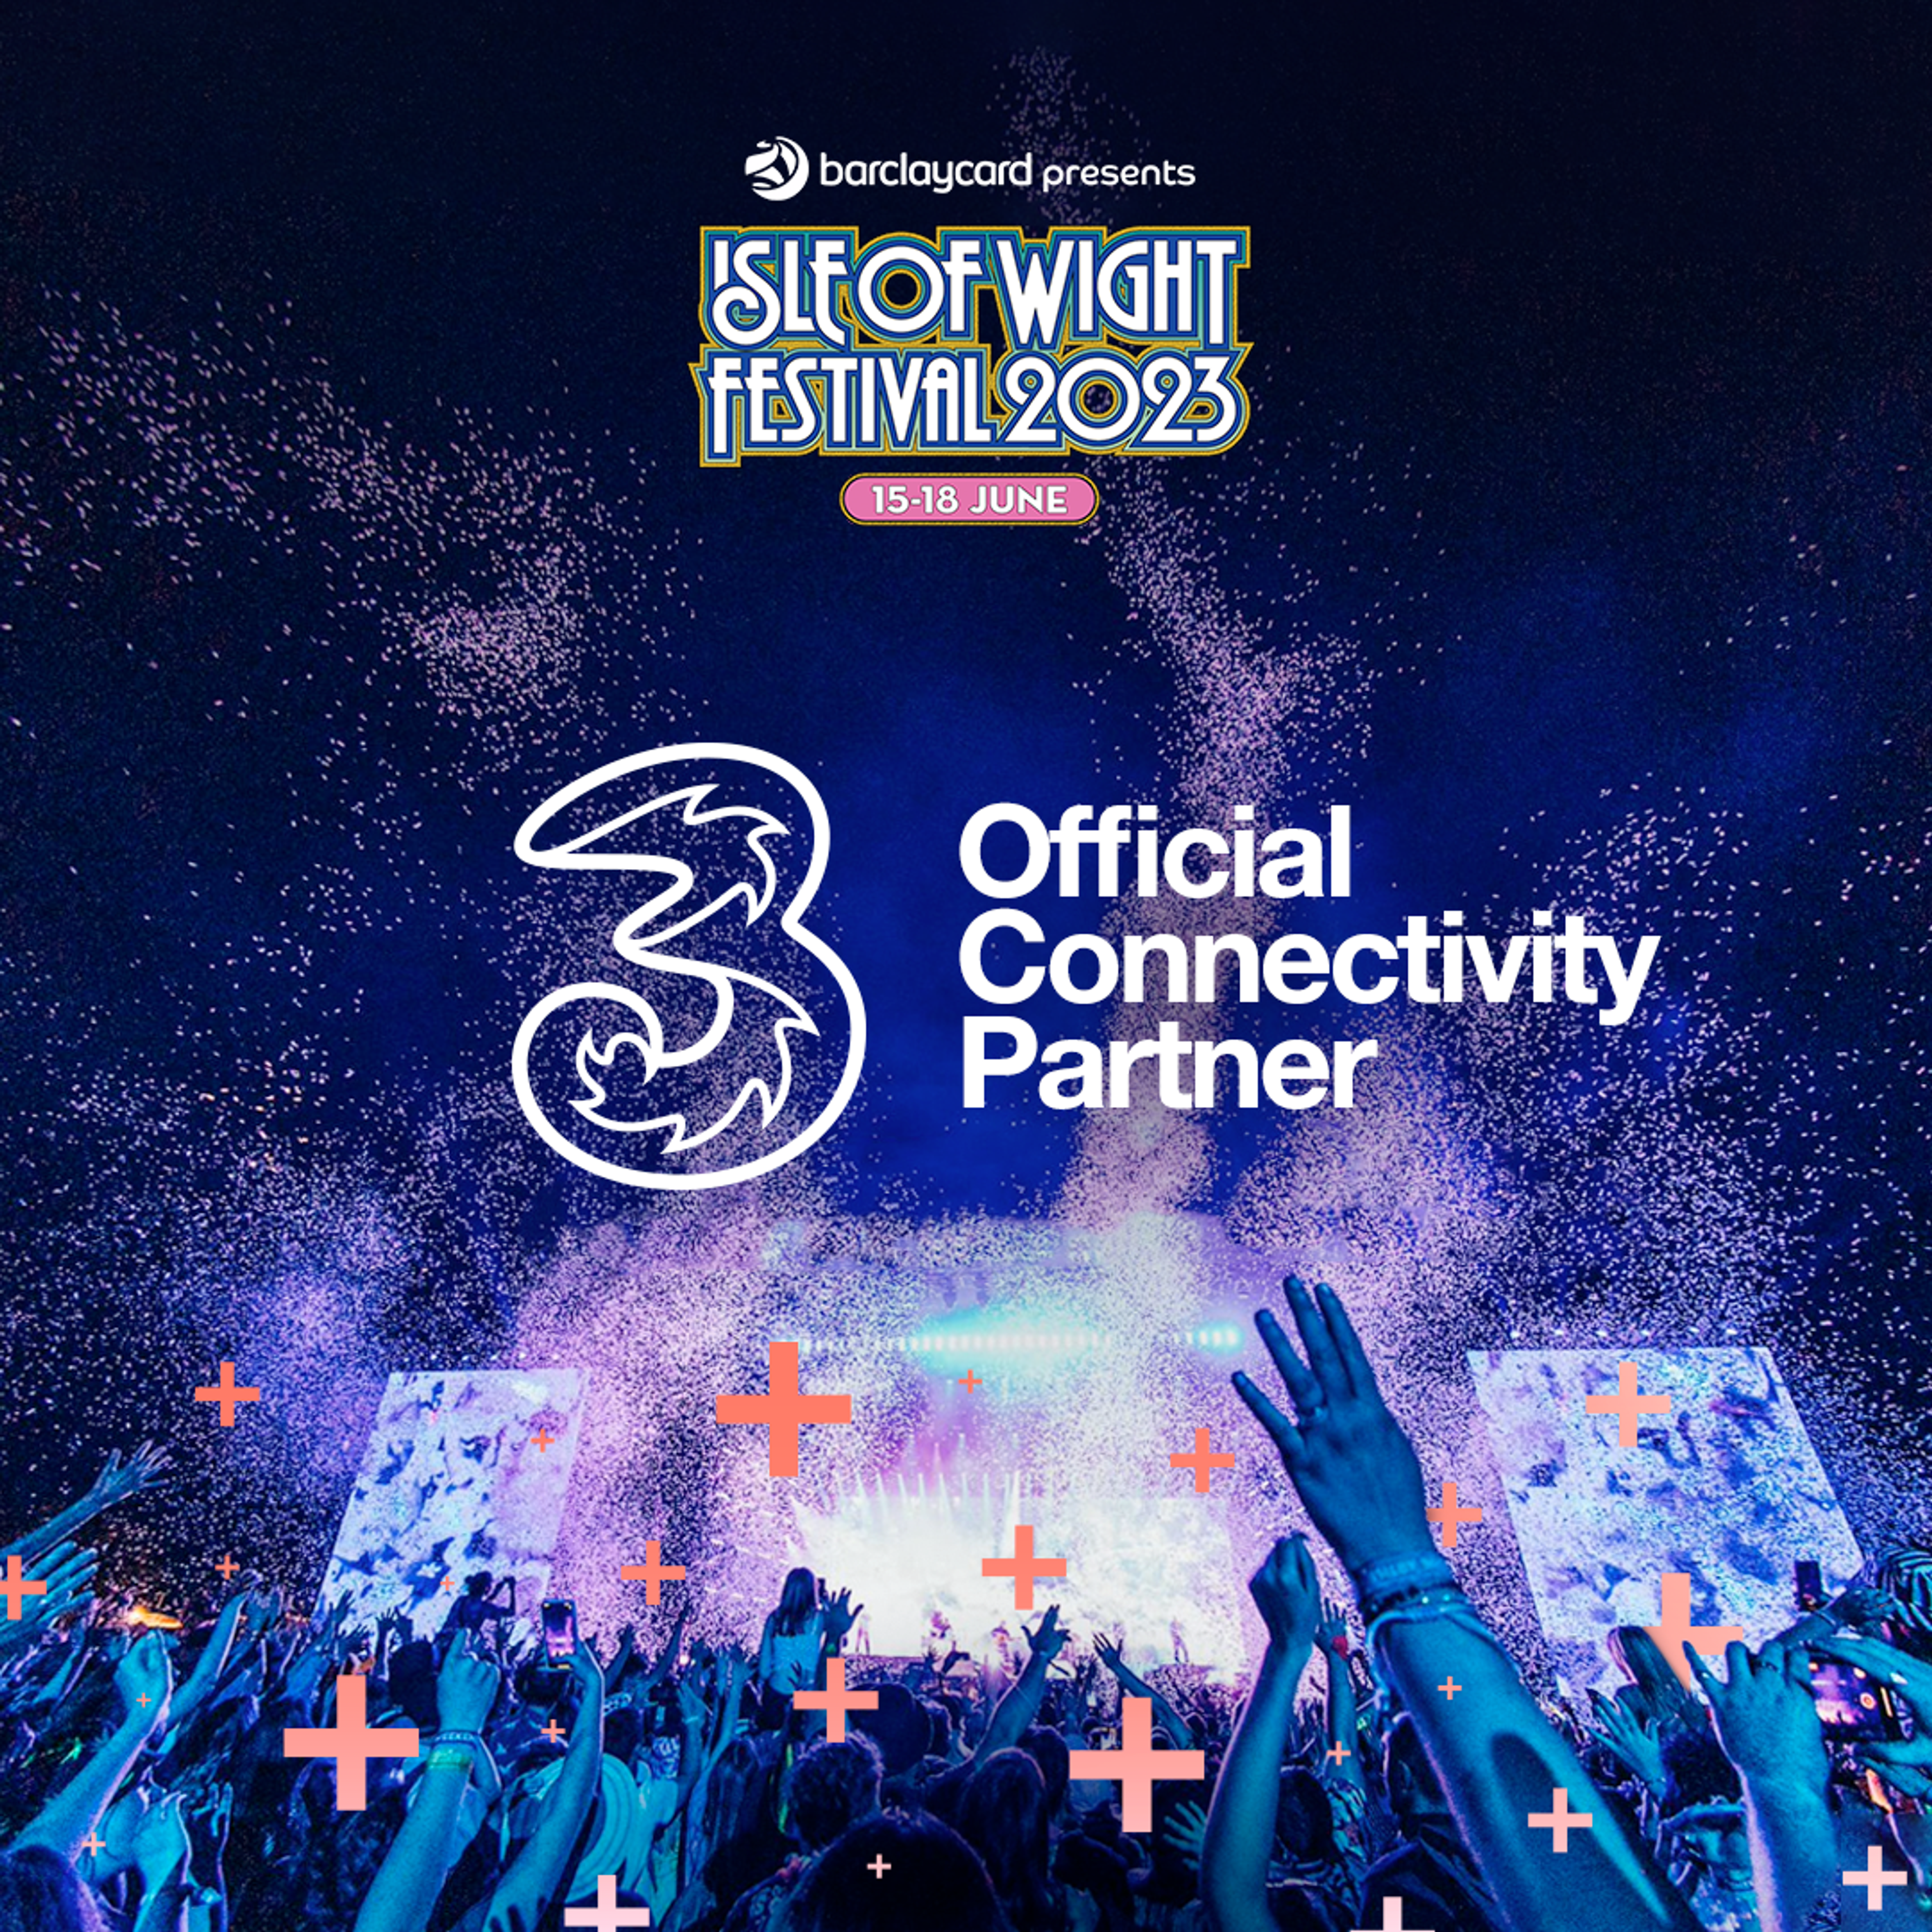 Festival stage at night behind the Isle of Wight 2023 and Three logos